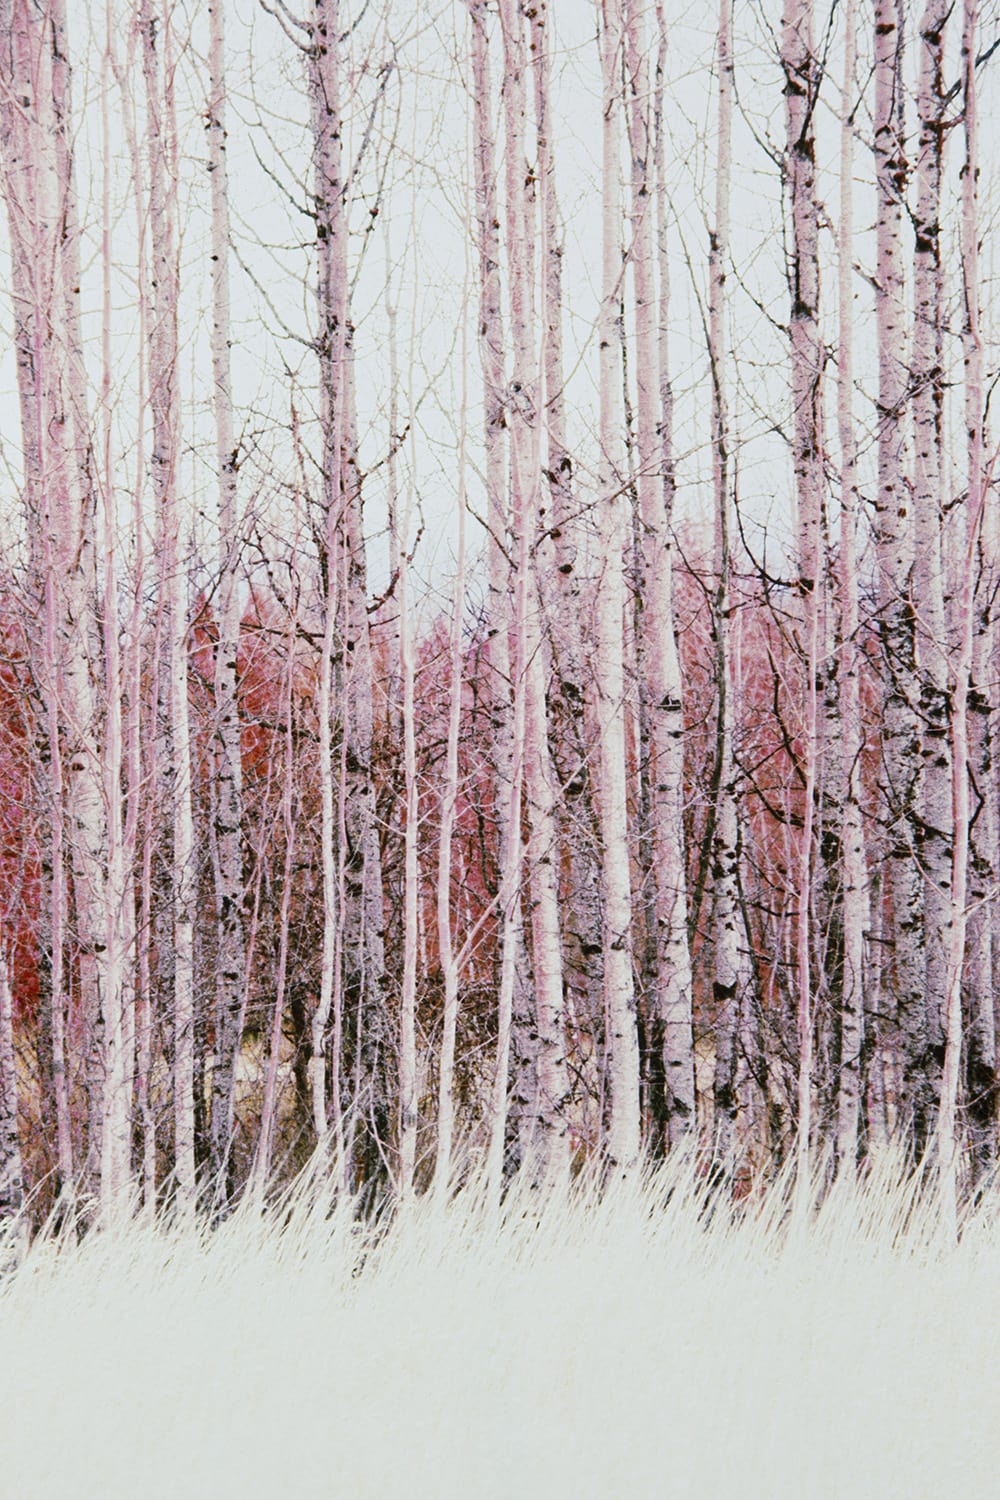 Color Infrared Image Of Quaking Aspen Trees And Meadow